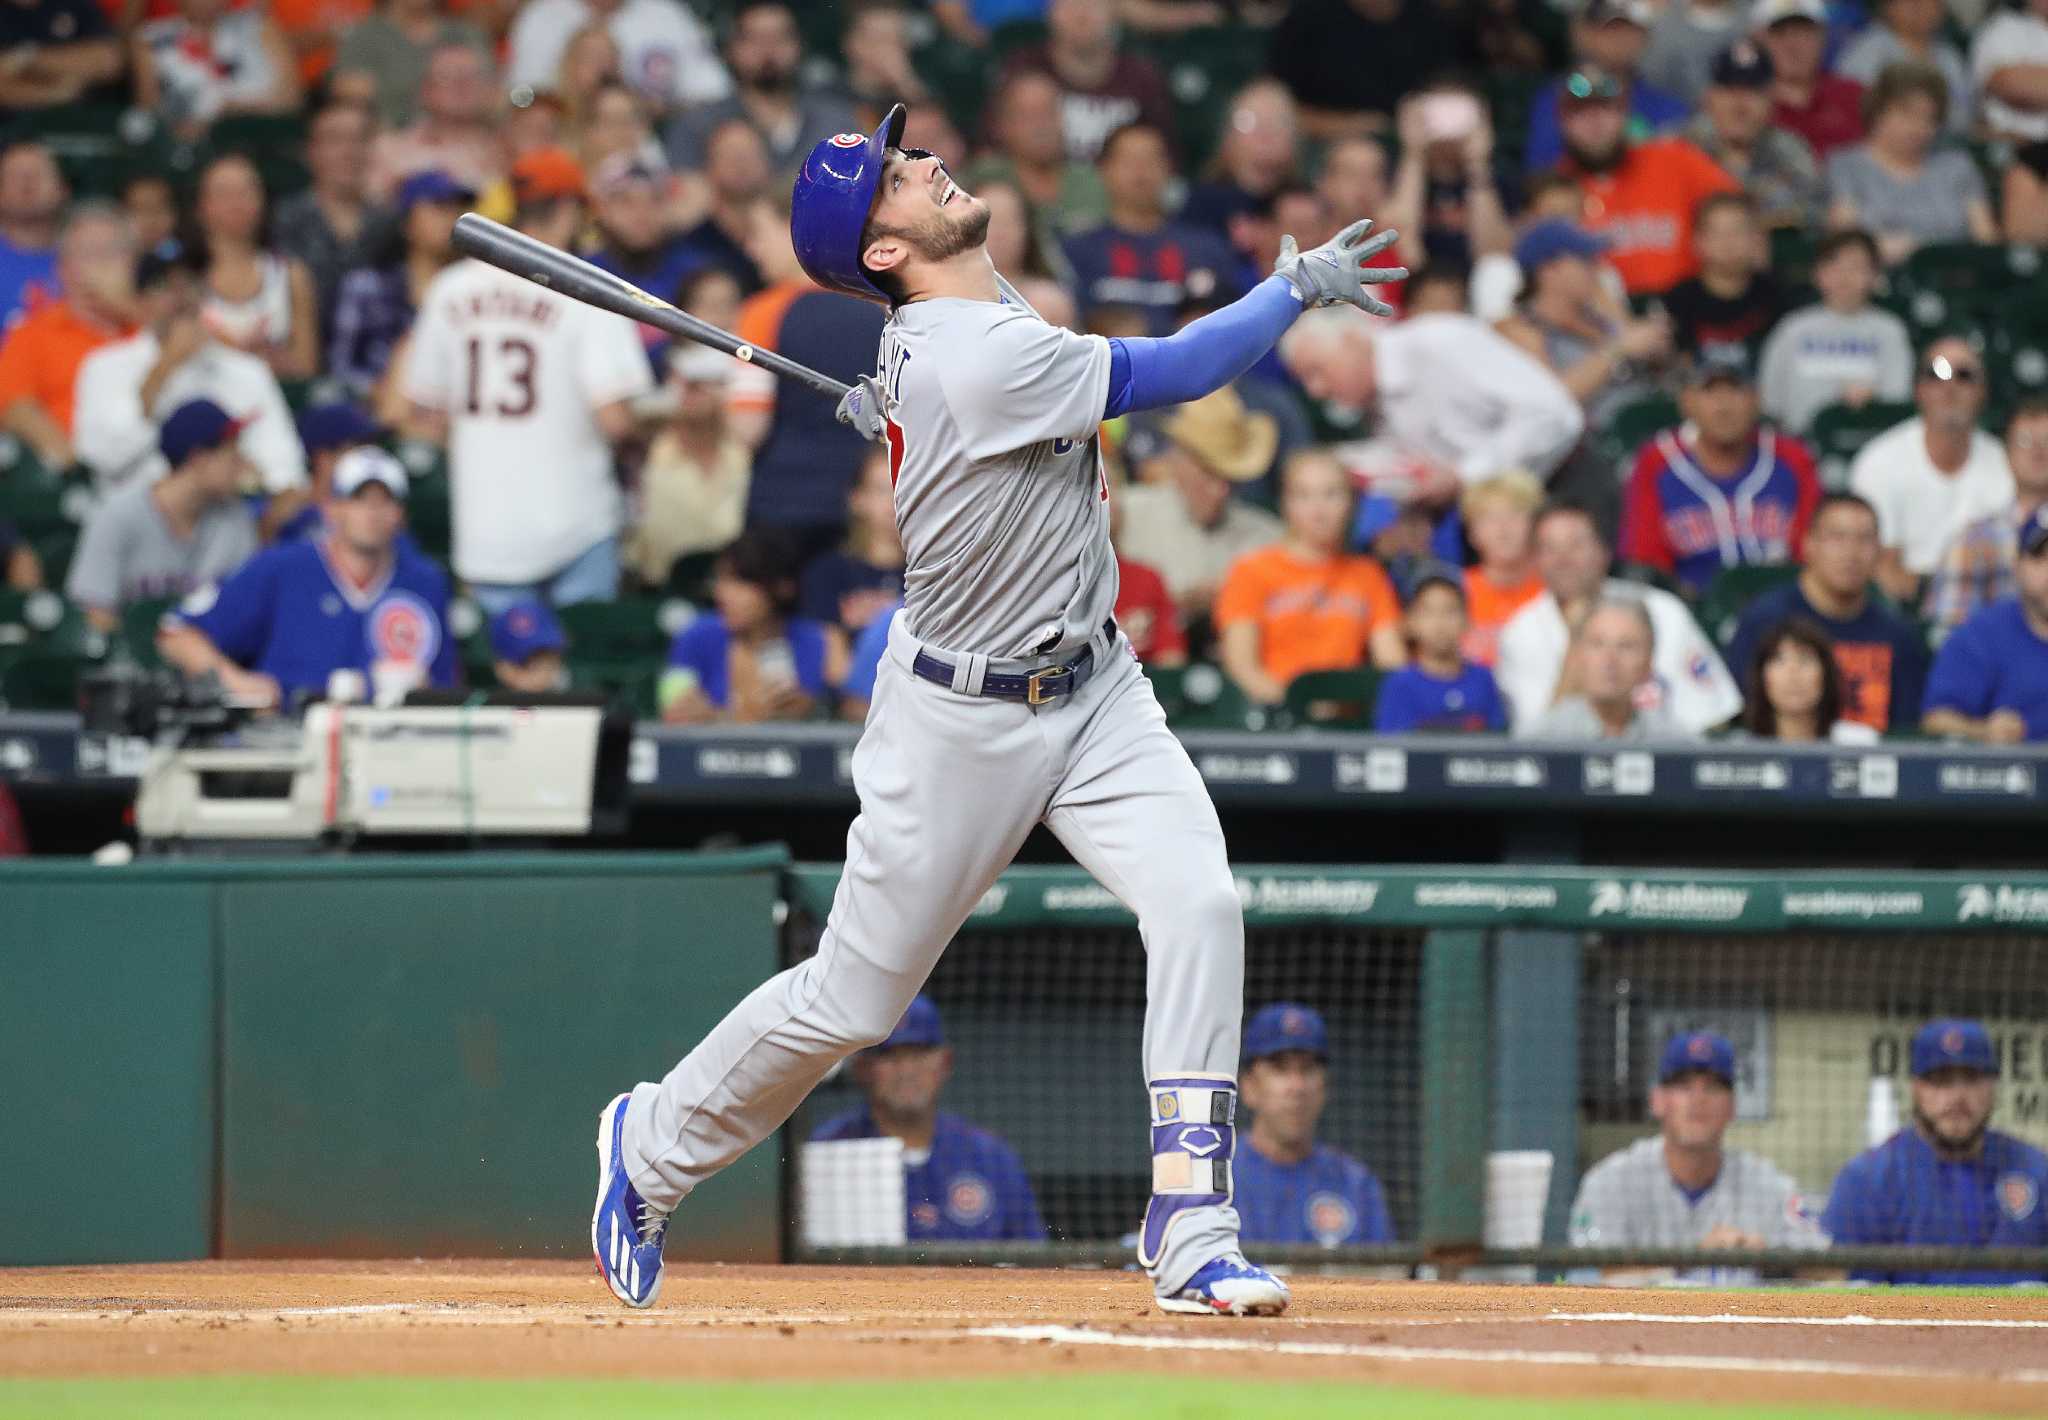 Cubs rookie slugger Kris Bryant quickly making his mark in majors